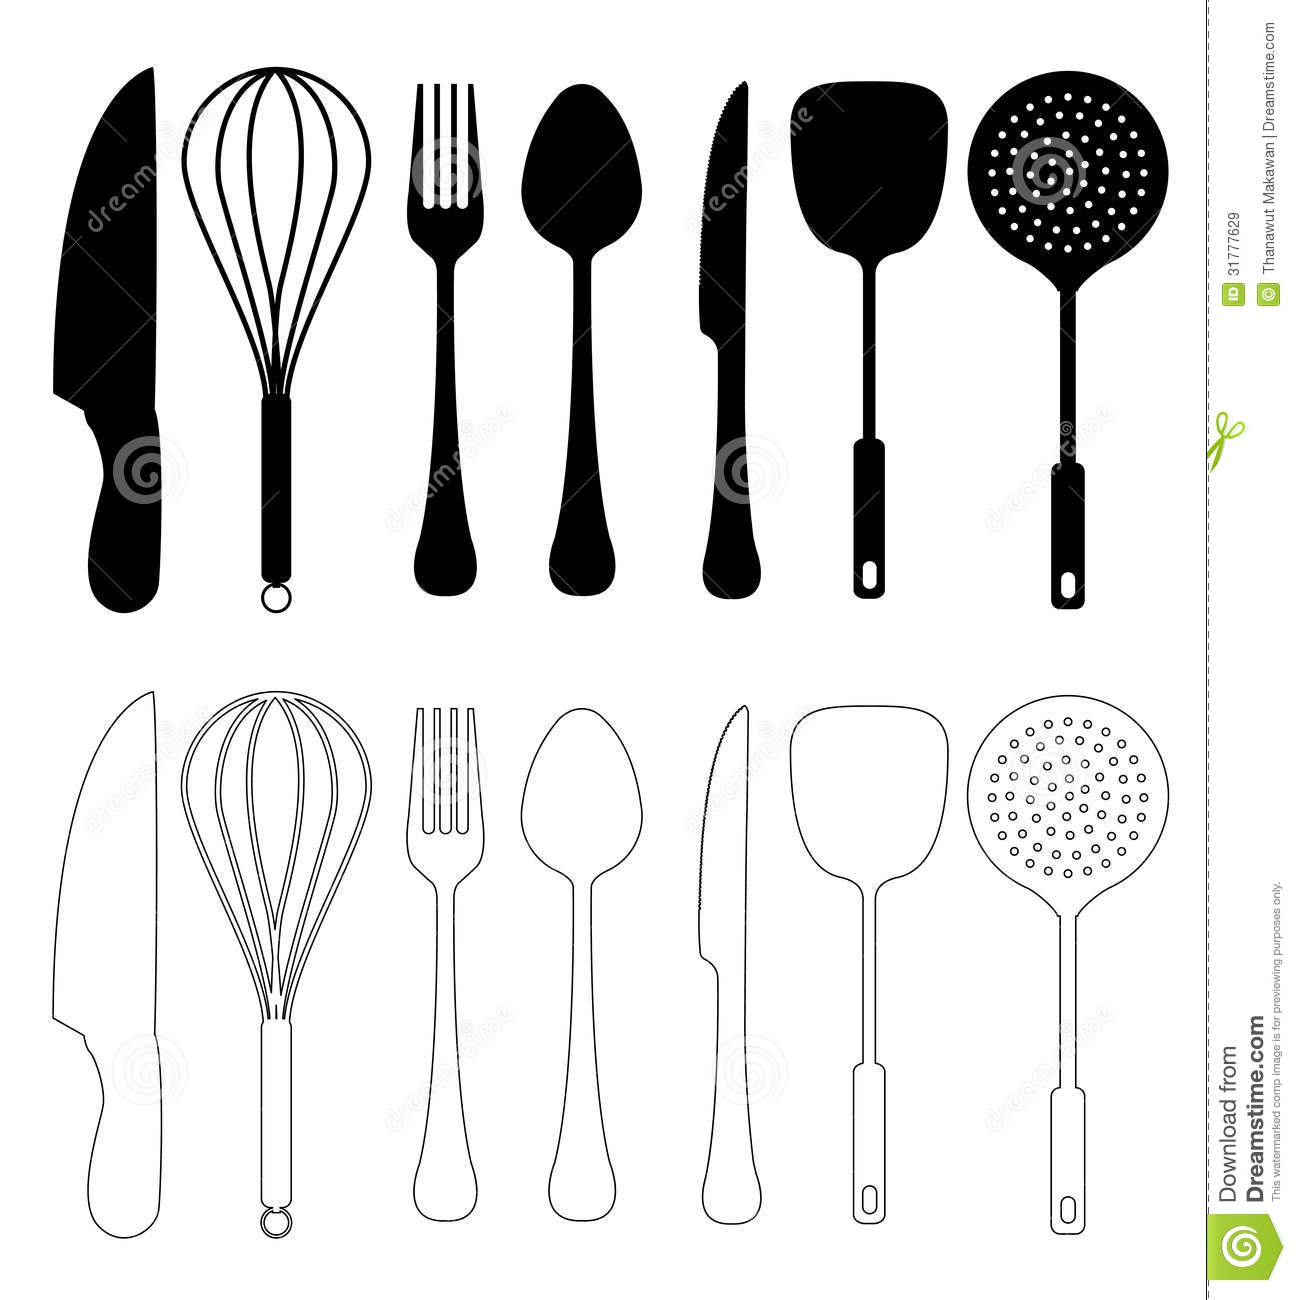 Kitchen Utensils Vector Royalty Free Stock Images   Image  31777629